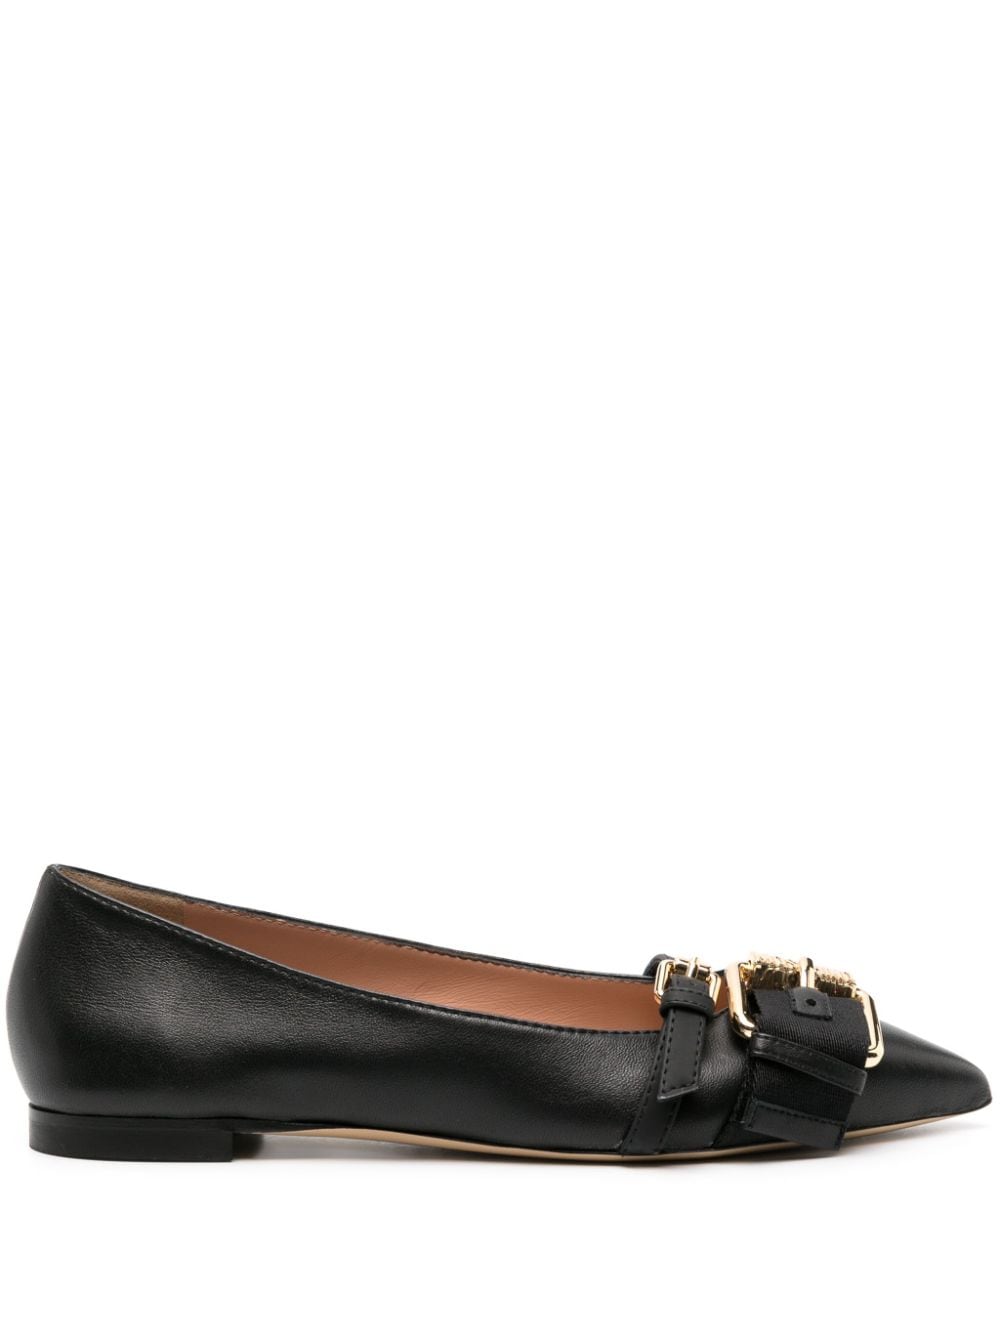 Moschino buckled-straps leather ballerina shoes Black